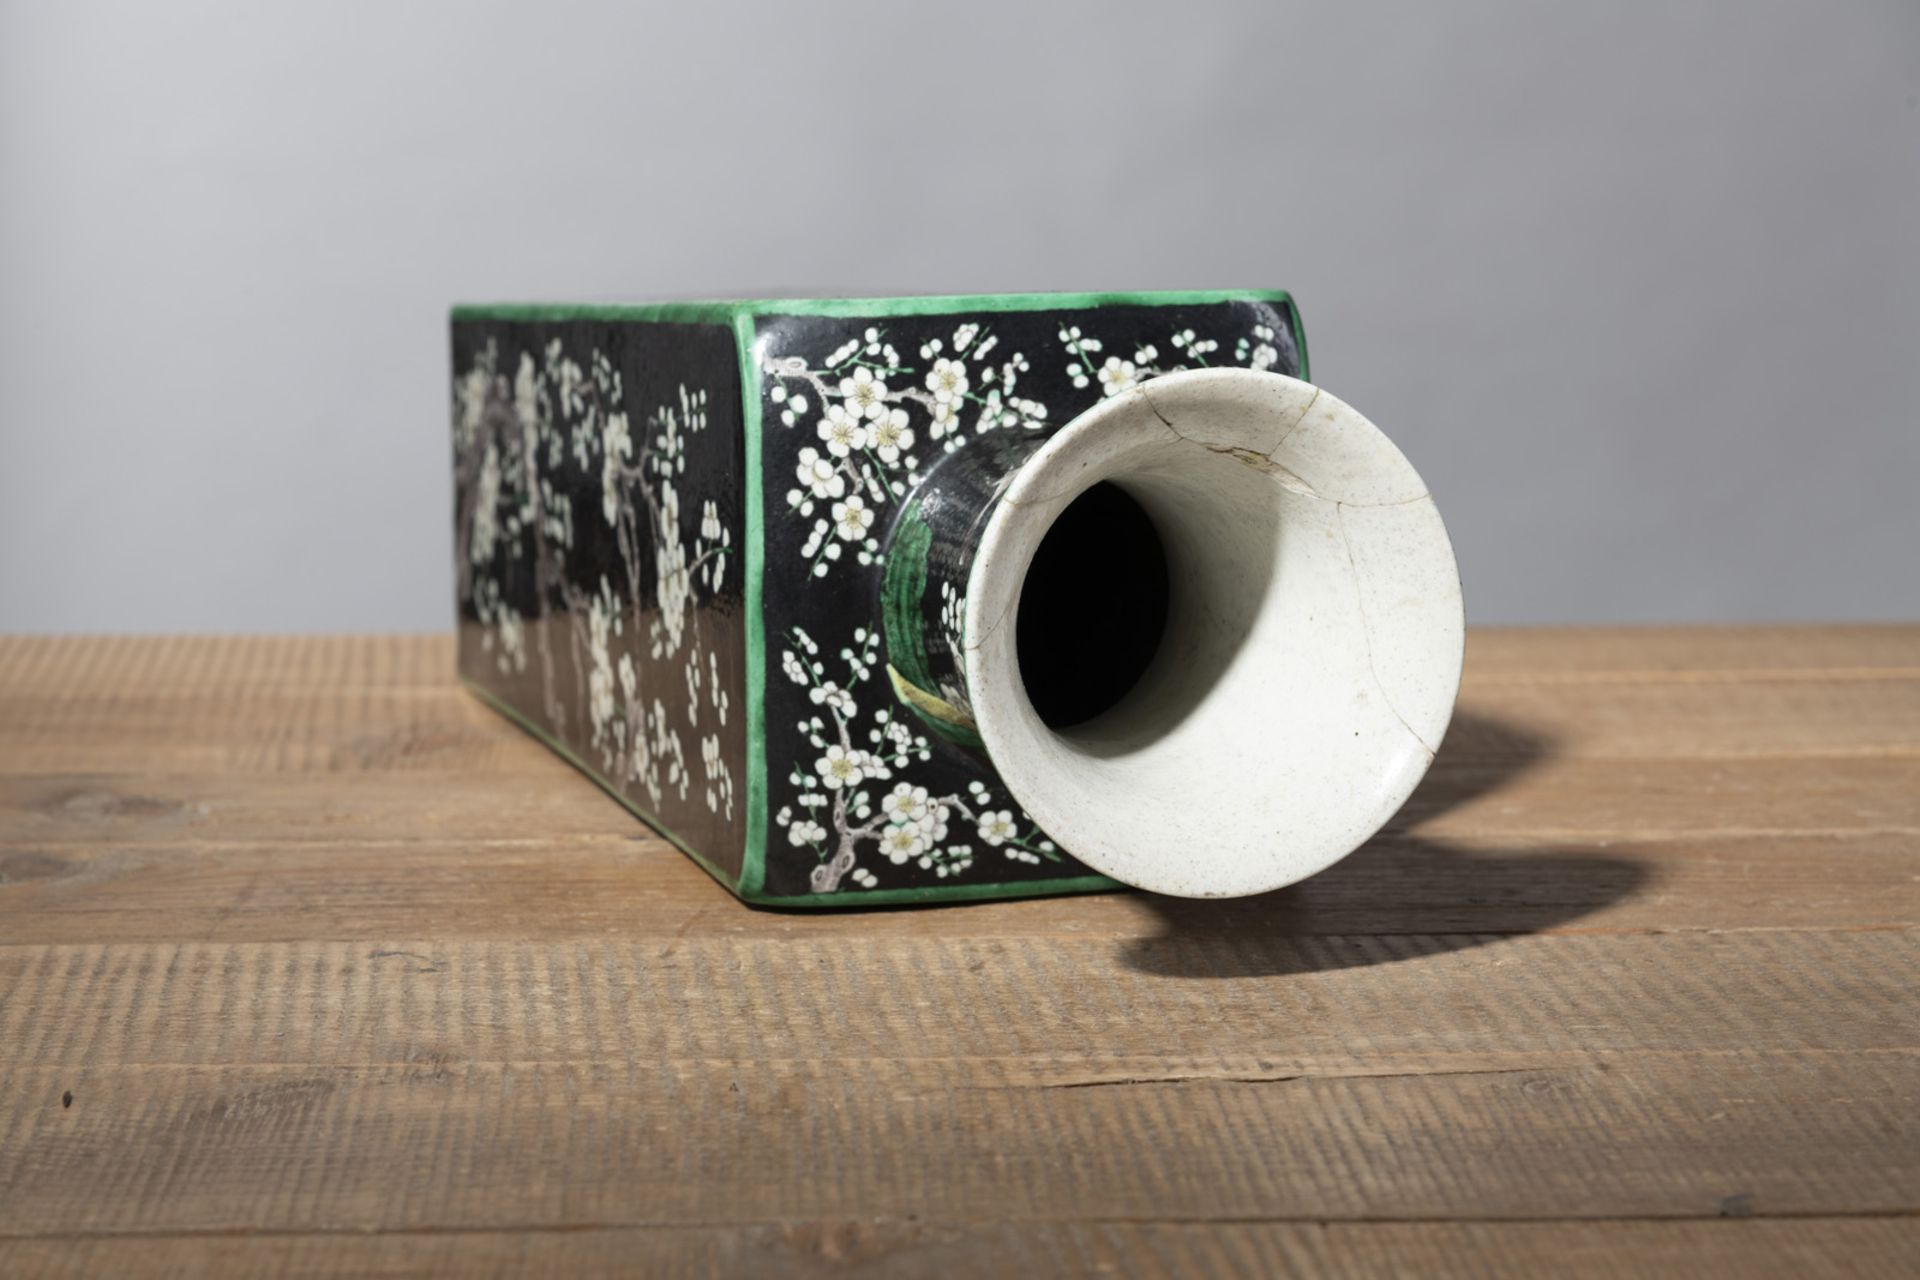 A SQUARE FAMILLE NOIRE PORCELAIN VASE WITH FLOWERING PRUNUS TREES ON ROCKS - Image 4 of 4